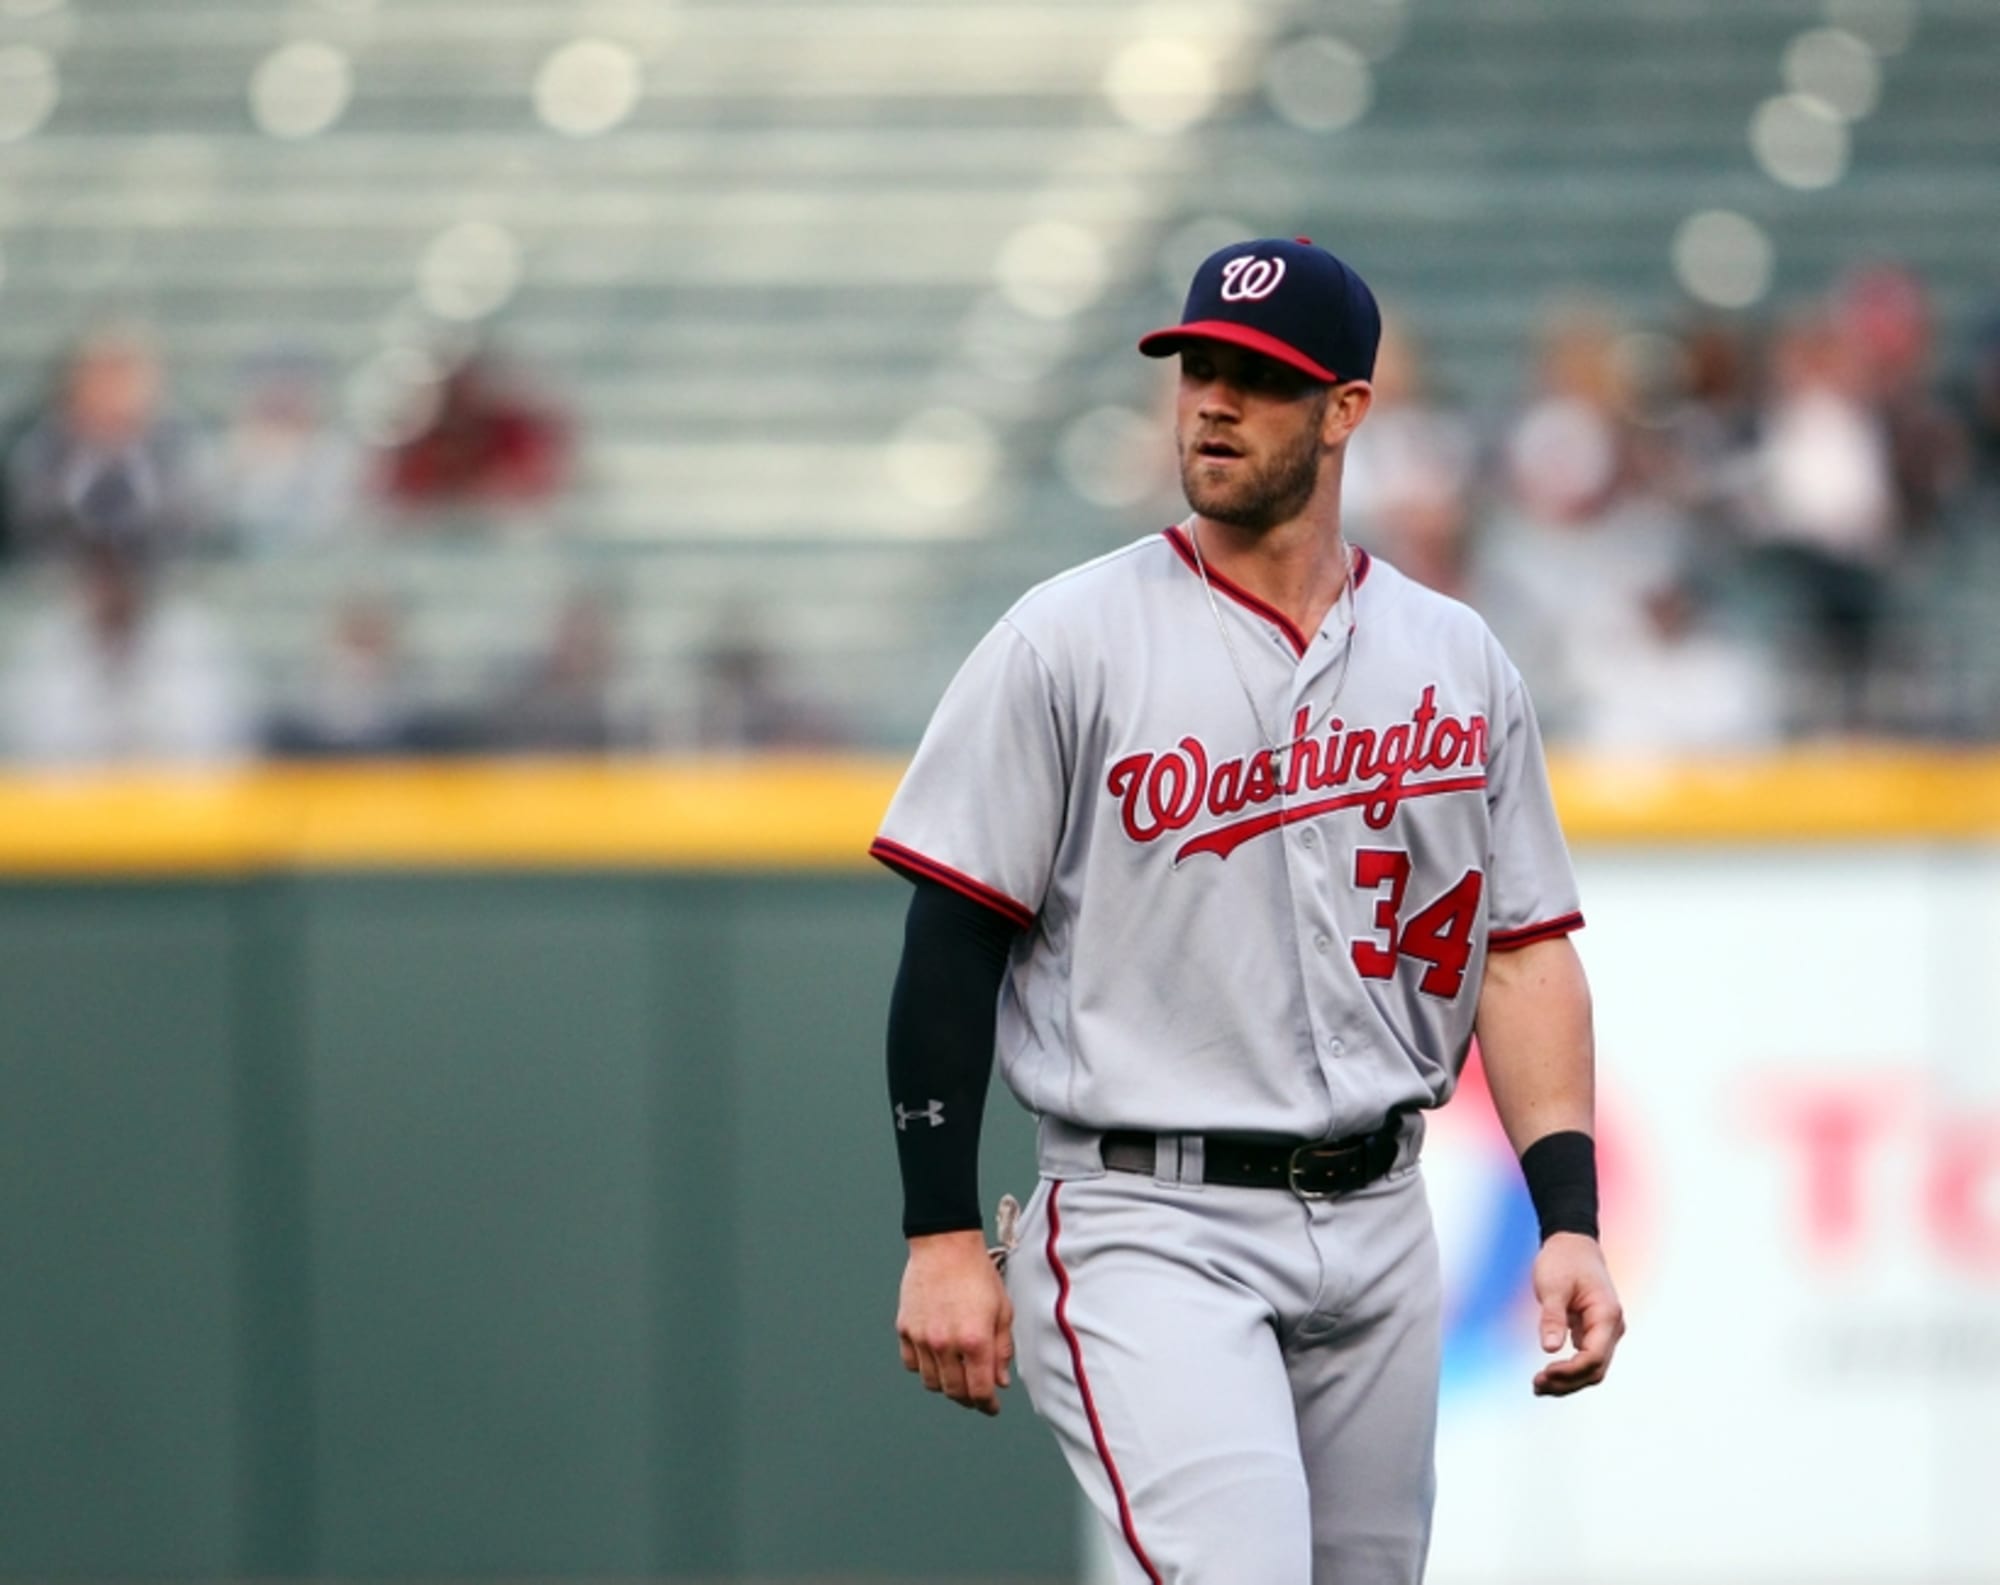 MLB Power Rankings: Washington Nationals close in on Cubs